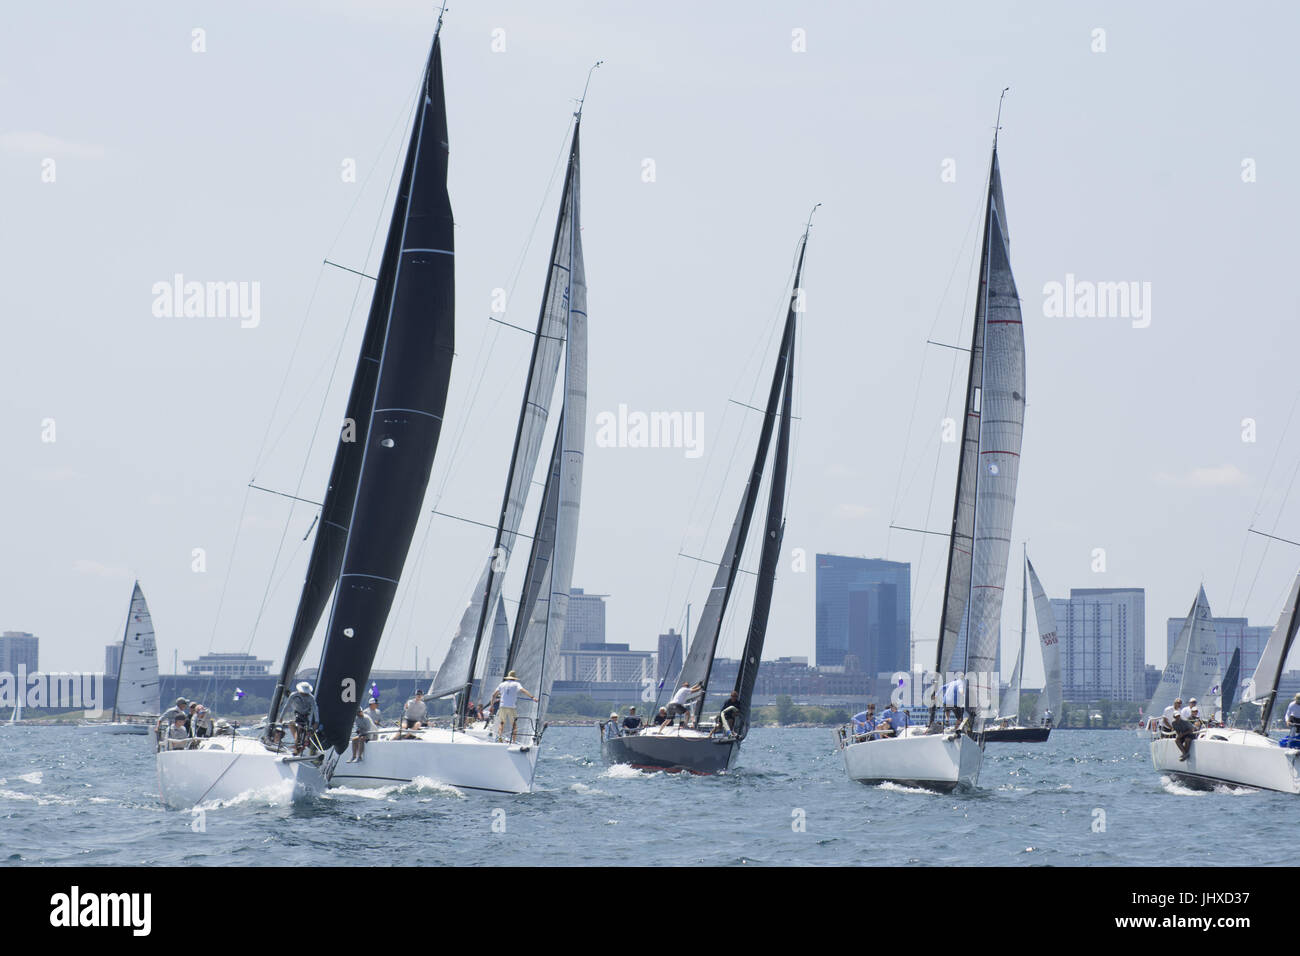 Chicago, IL, USA. 15th July, 2017. The boats are off in the Chicago Race to Mackinac. The ''cruising'' fleet of slower boats started their across-the-lake journey on Friday afternoon, July 14th. On Saturday, 19 fleets of boats began in waves every ten minutes. The largest and fastest boat were in the last two sections - turbo and multihull. The record-holder for time for a monohull occured in 2002 by Roy Disney's Pyewacket at 23 hours 30 minutes. High winds and waves have caused 70 boats to drop out of the race by Sunday afternoon. Two boats capsized. 5 crew members were rescued by another Stock Photo